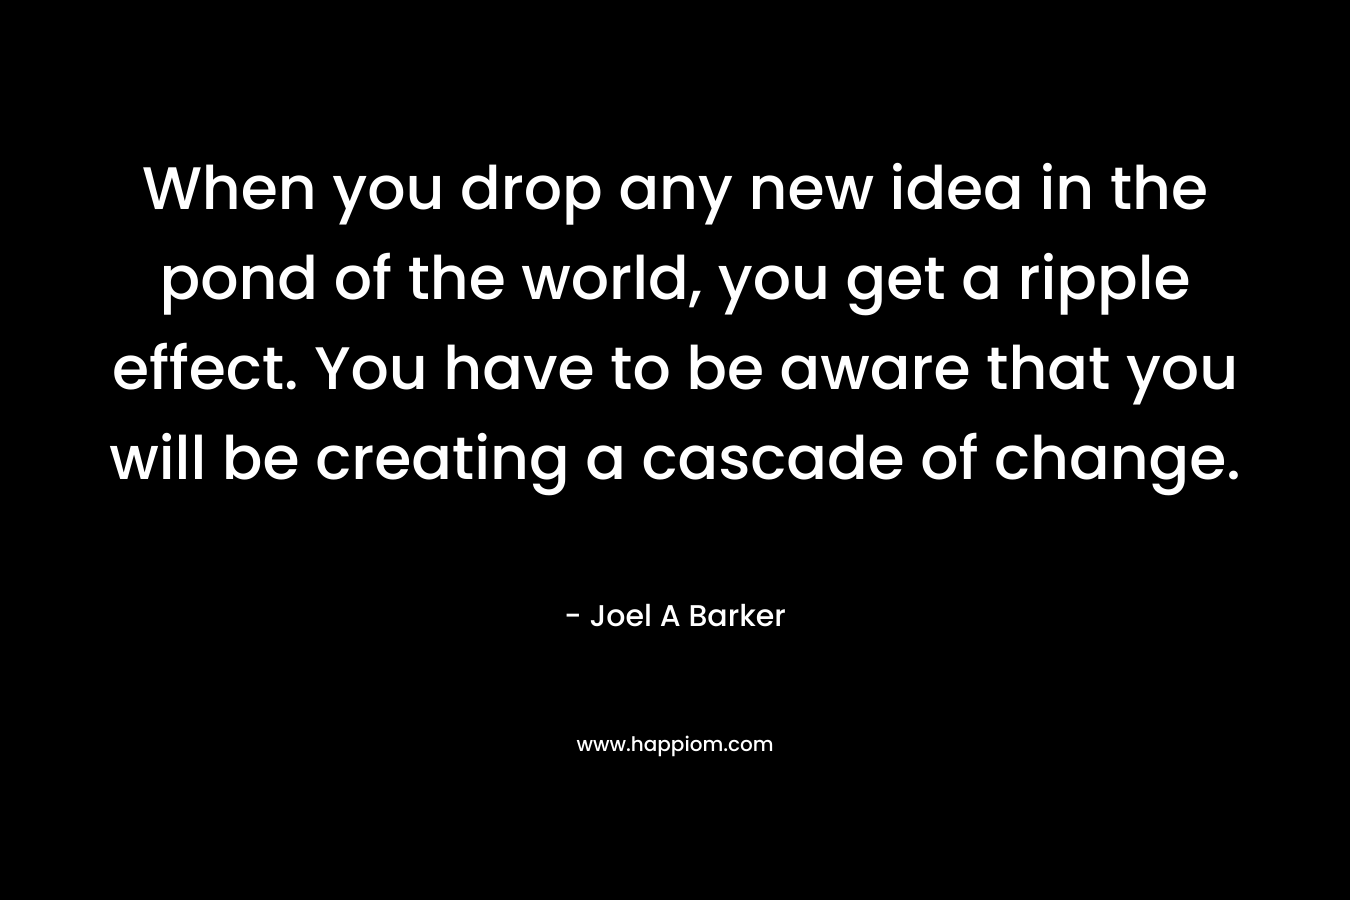 When you drop any new idea in the pond of the world, you get a ripple effect. You have to be aware that you will be creating a cascade of change.